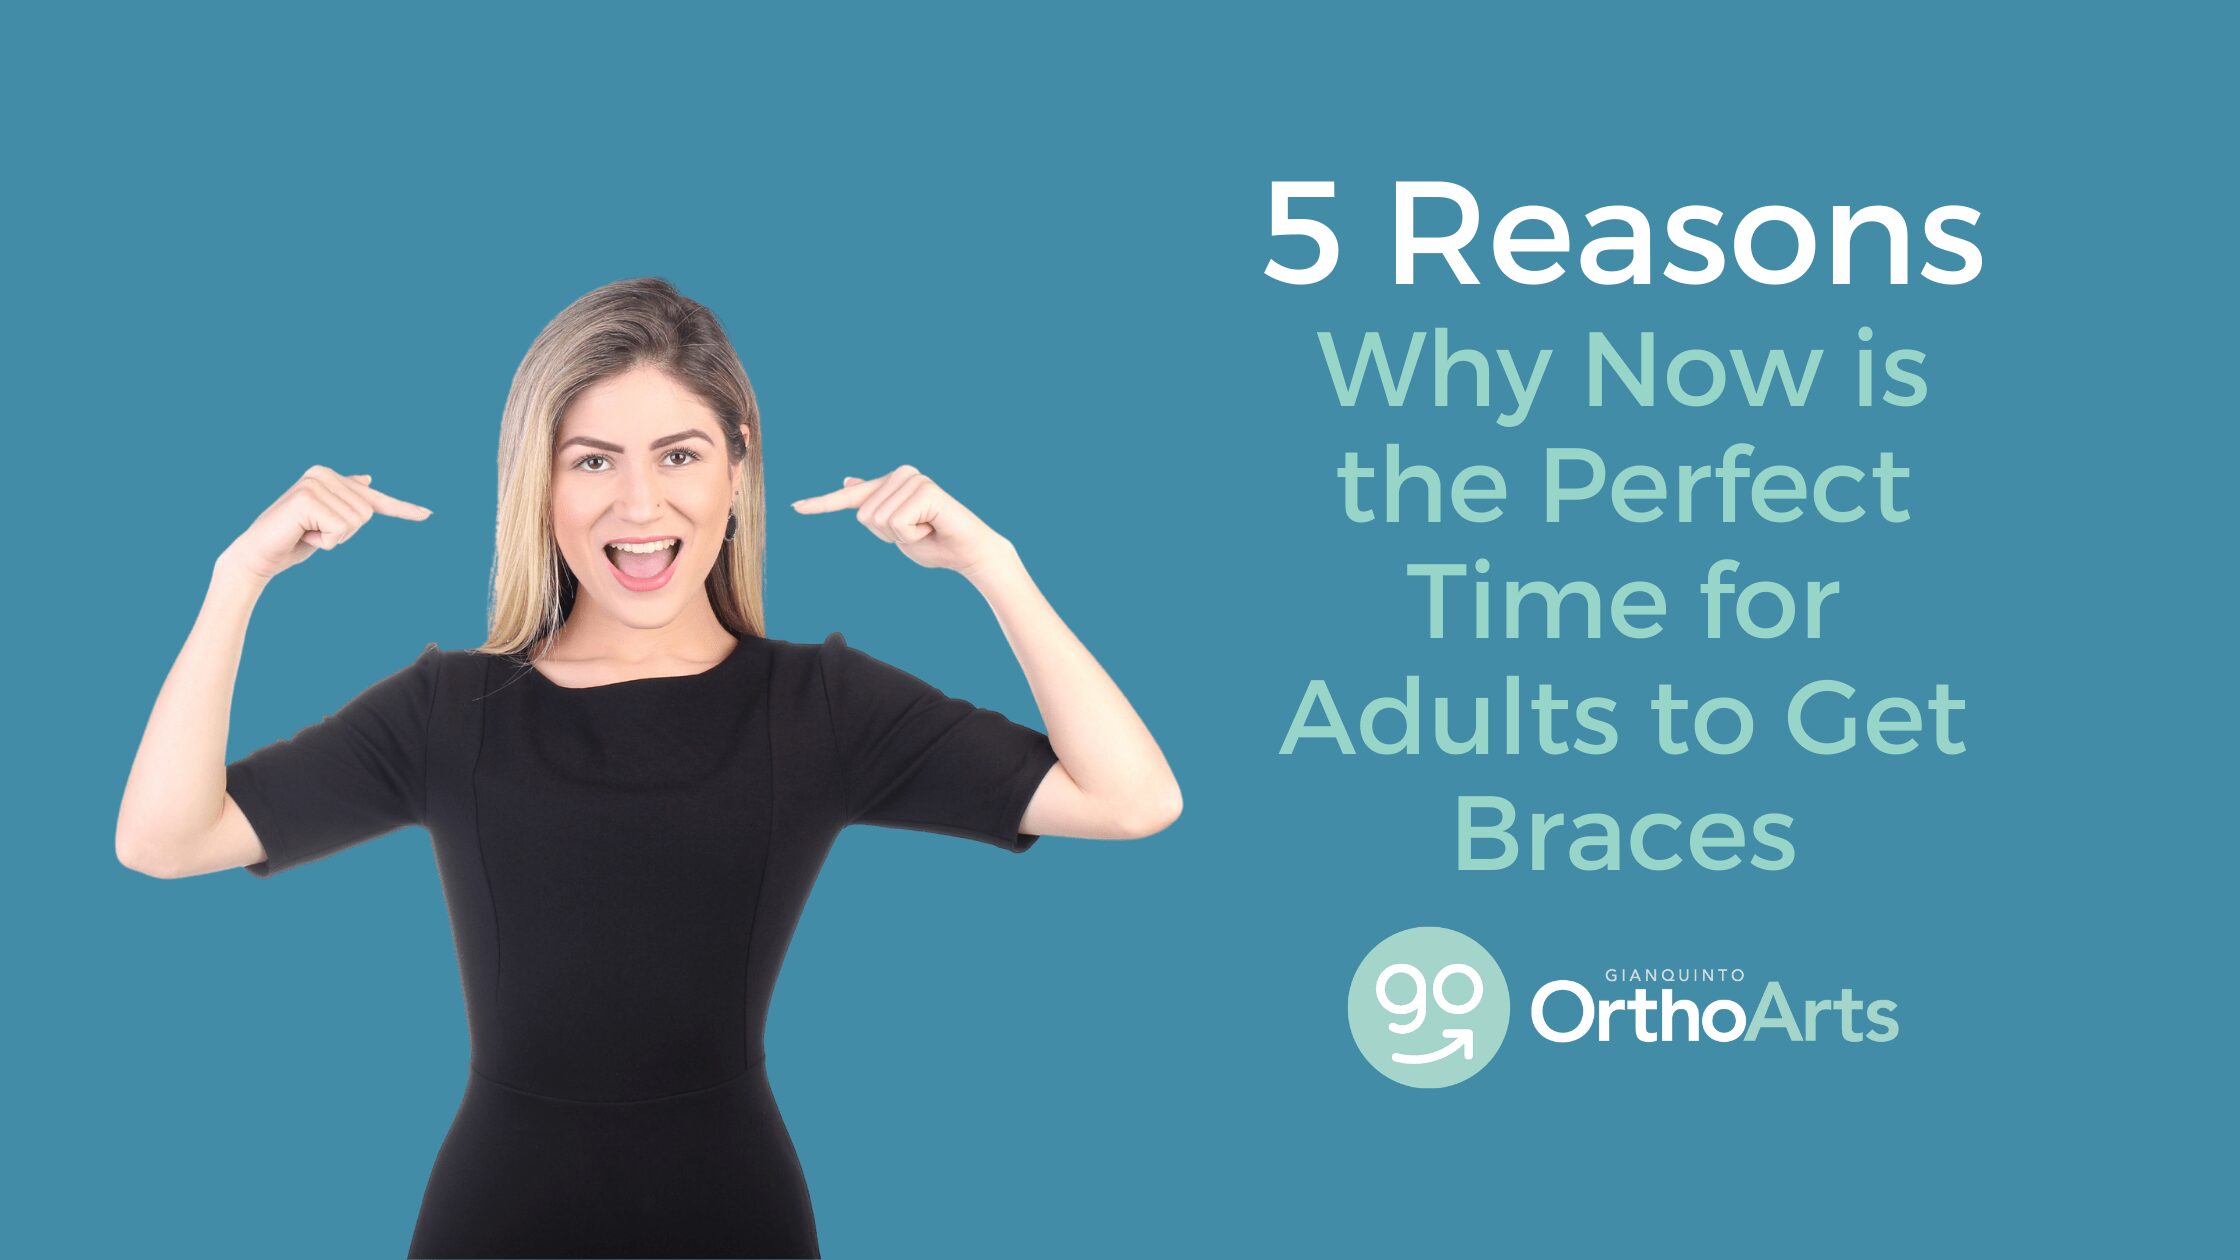 5 Reasons Why Now Is the Perfect Time for Adults to get Braces